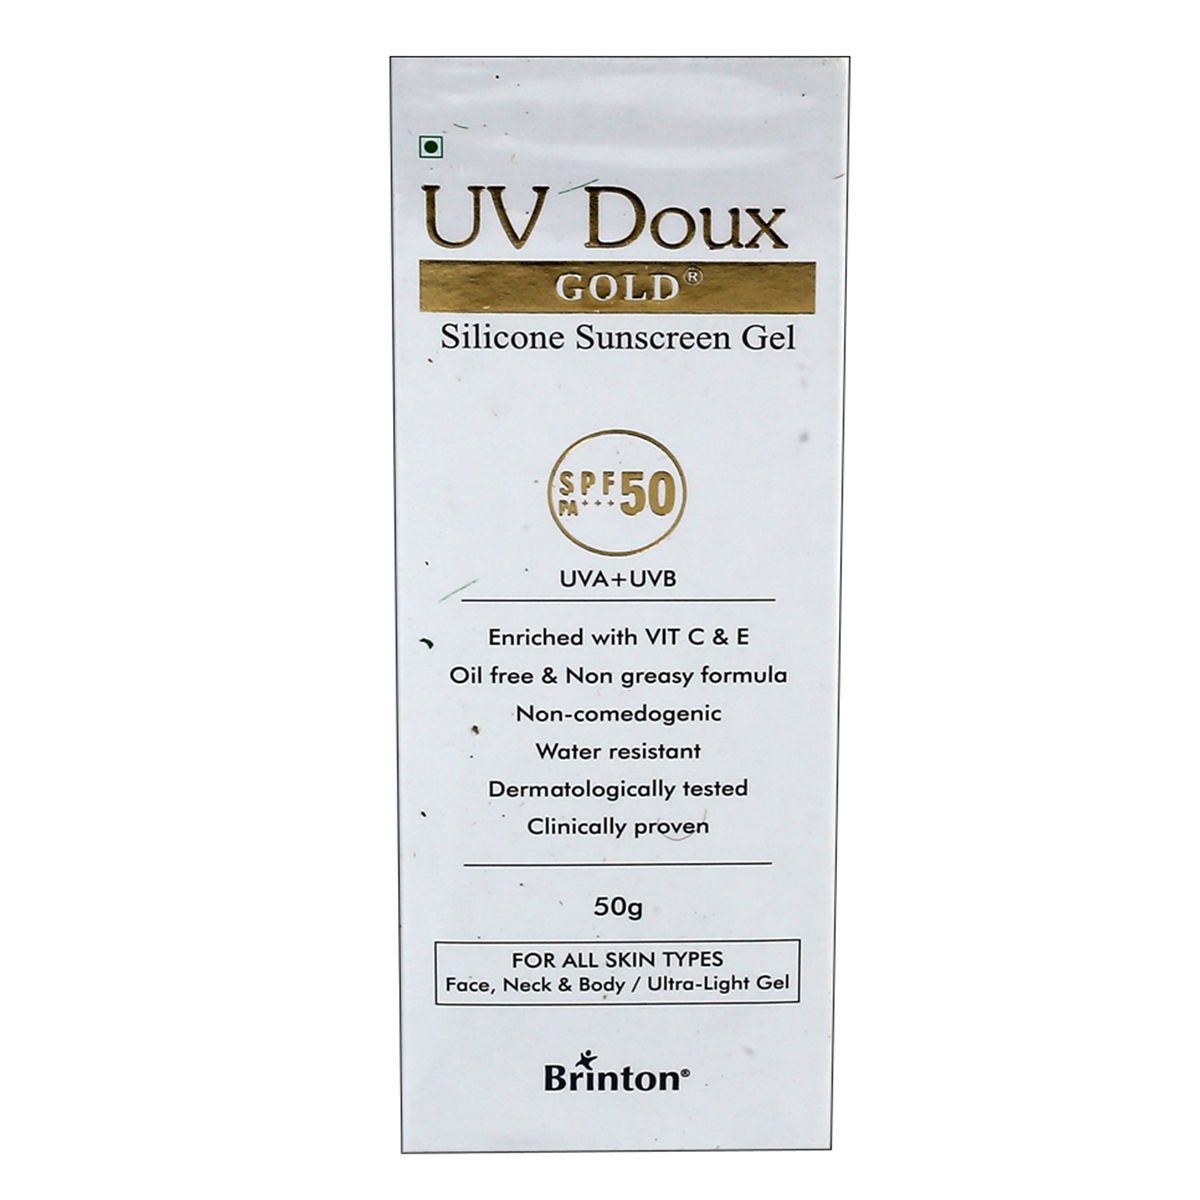 Buy UV Doux Gold Spf 50 Silicone Sunscreen Gel 50 gm Online